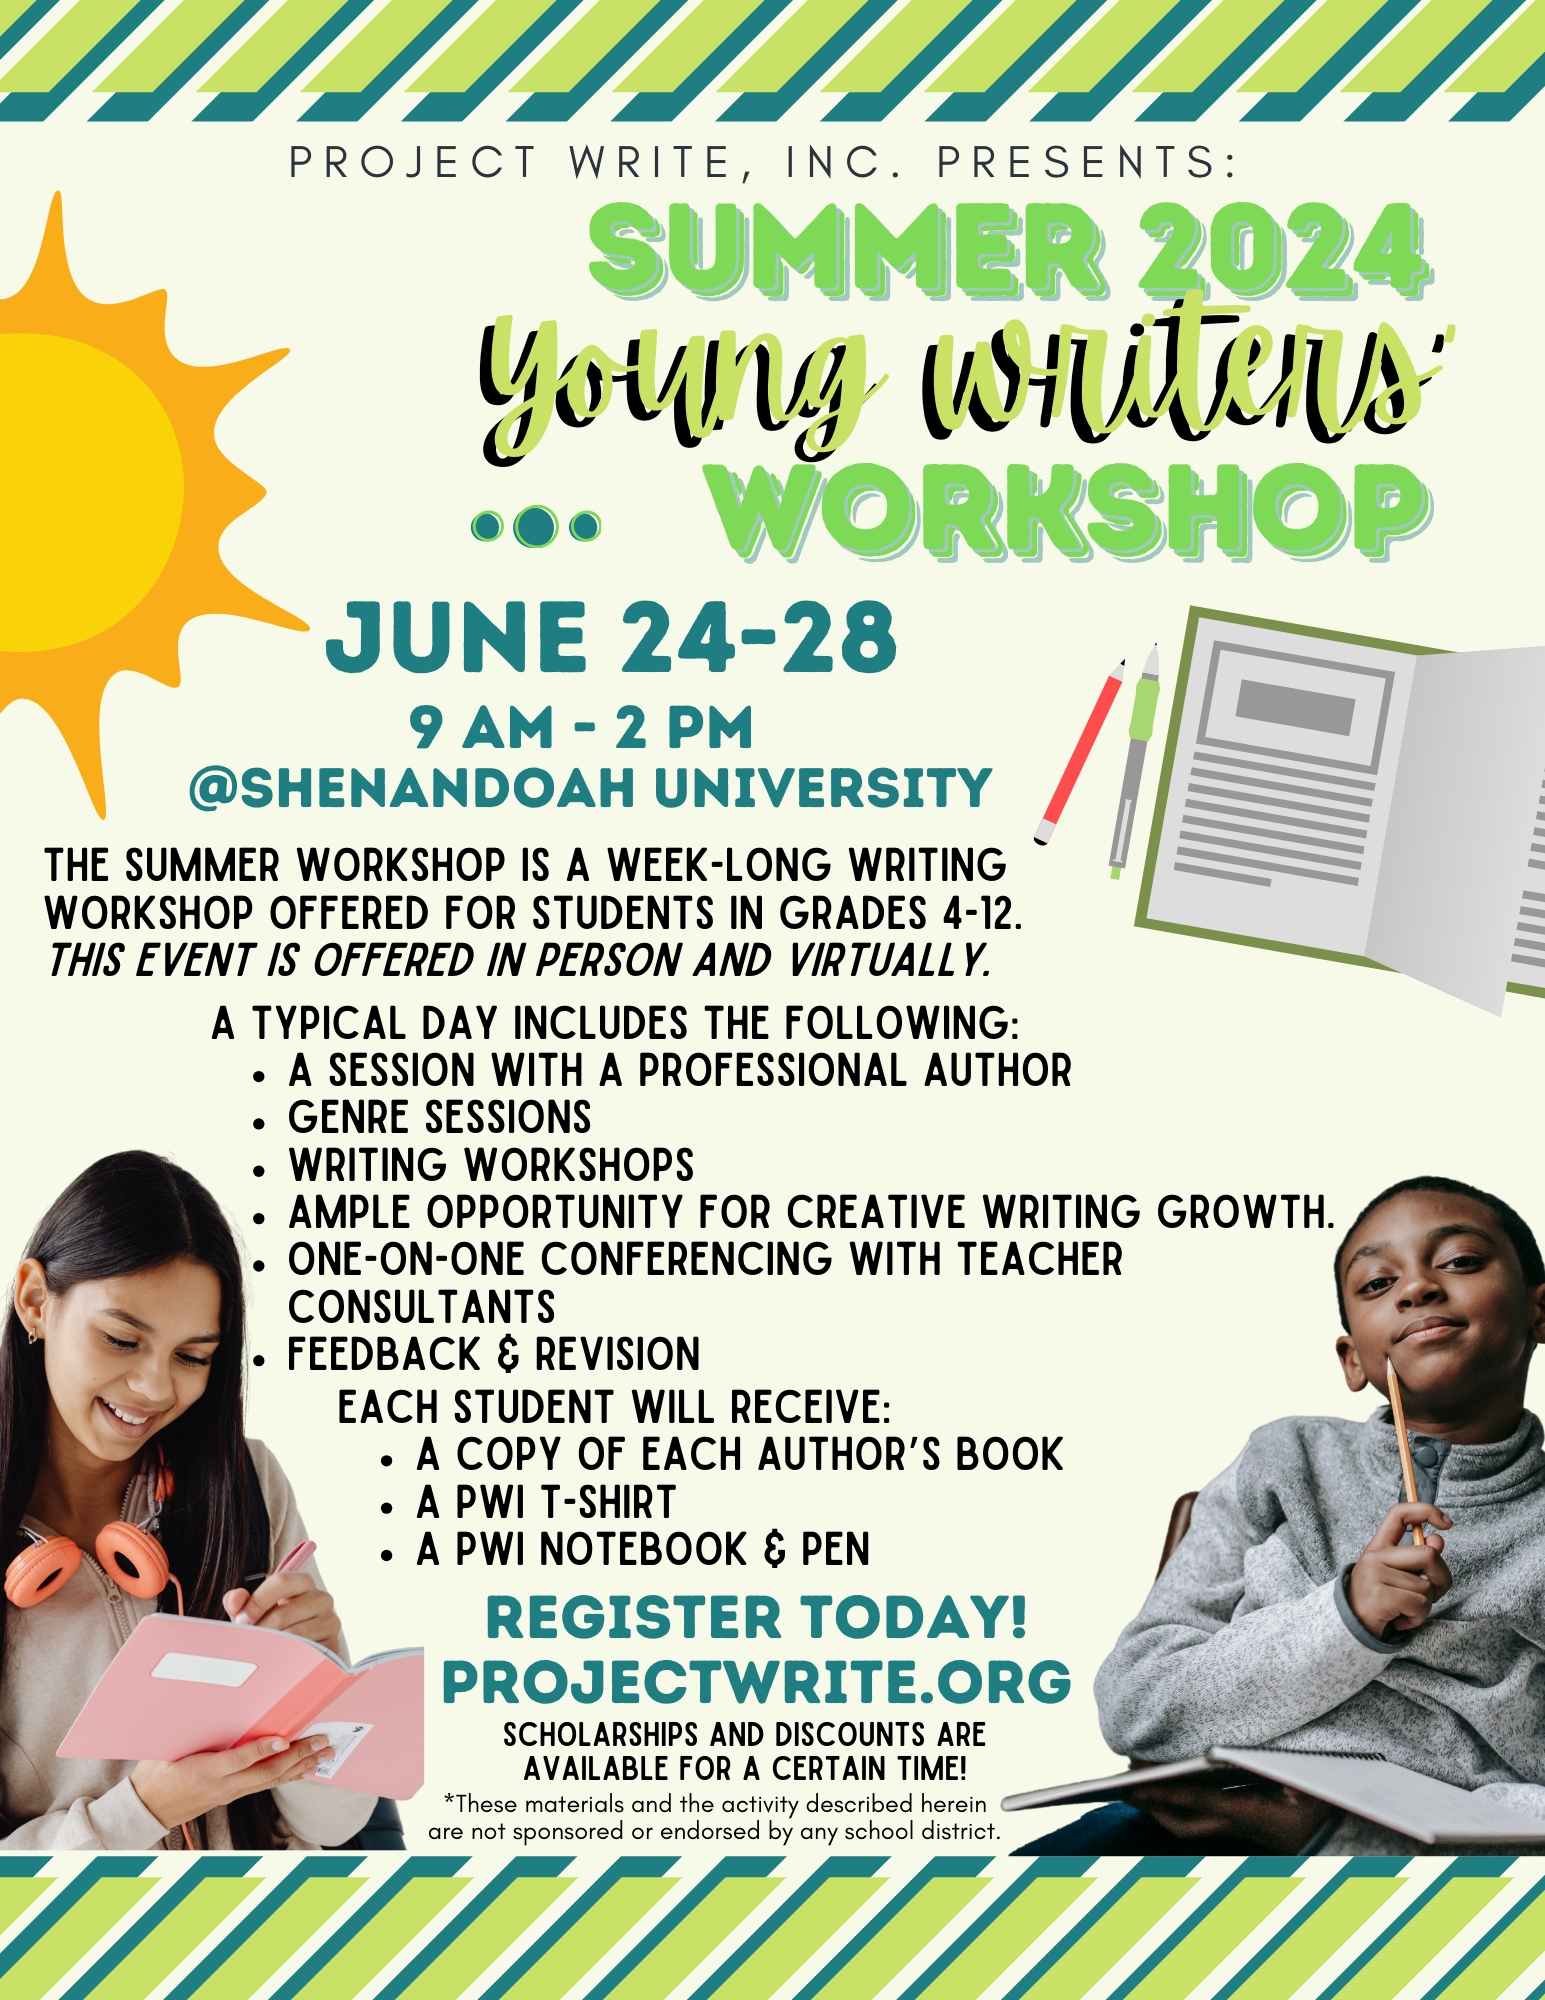 The 2024 summer young writers' workshop will be held June 24-28 at Shenandoah University.